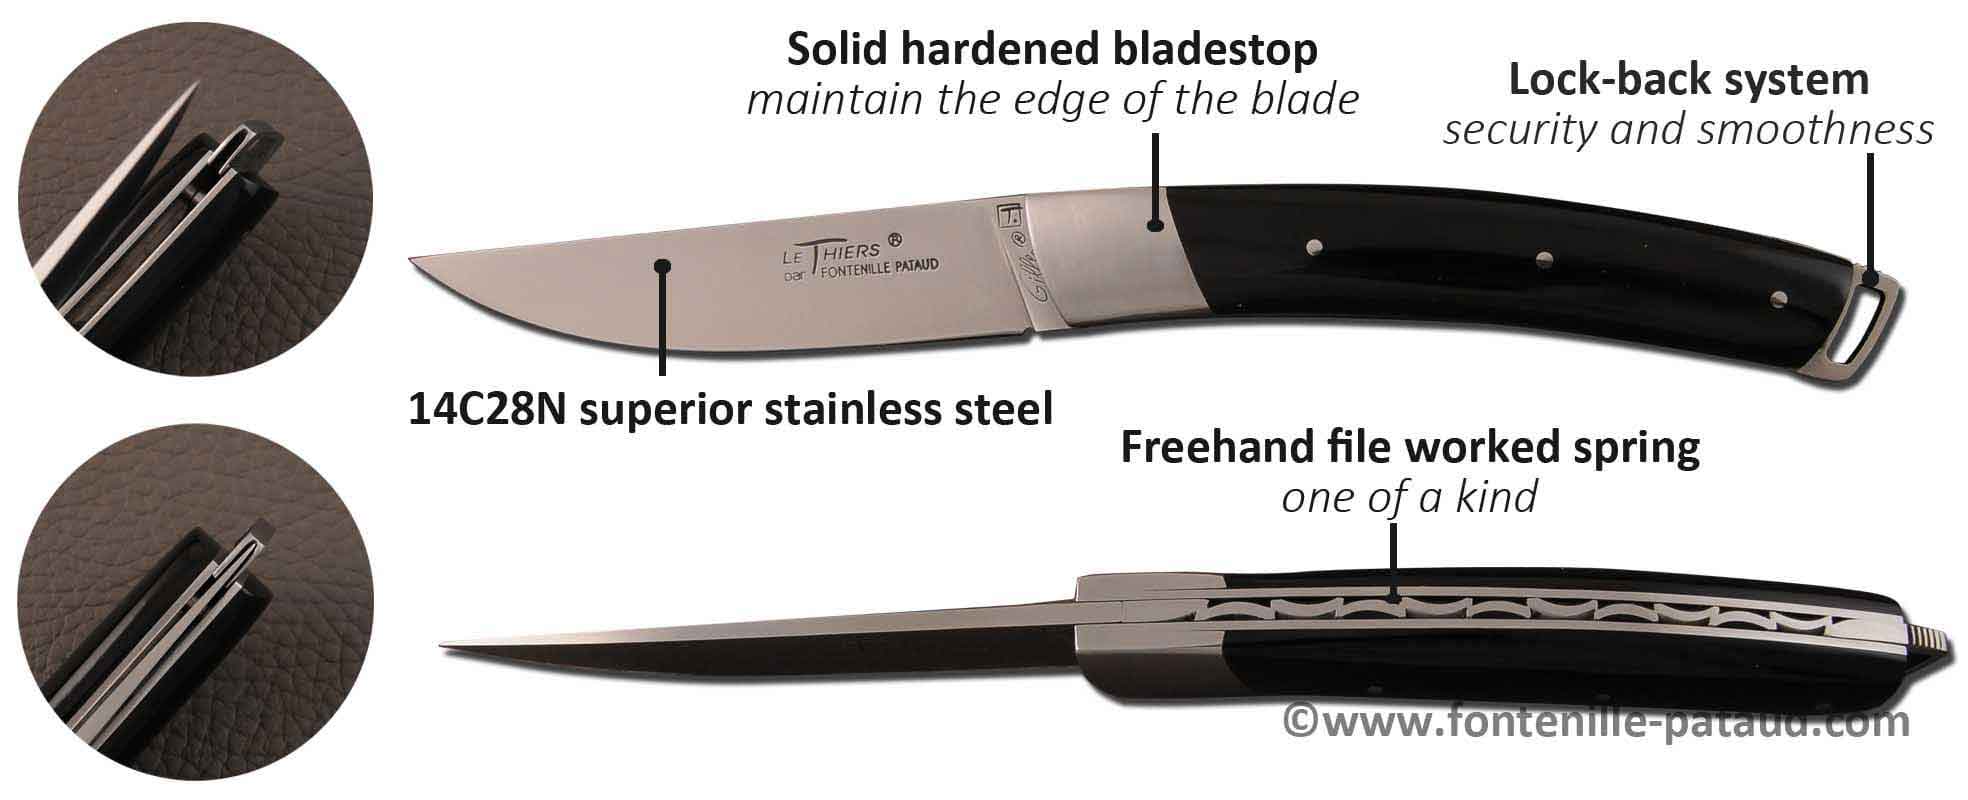 Le thiers knife